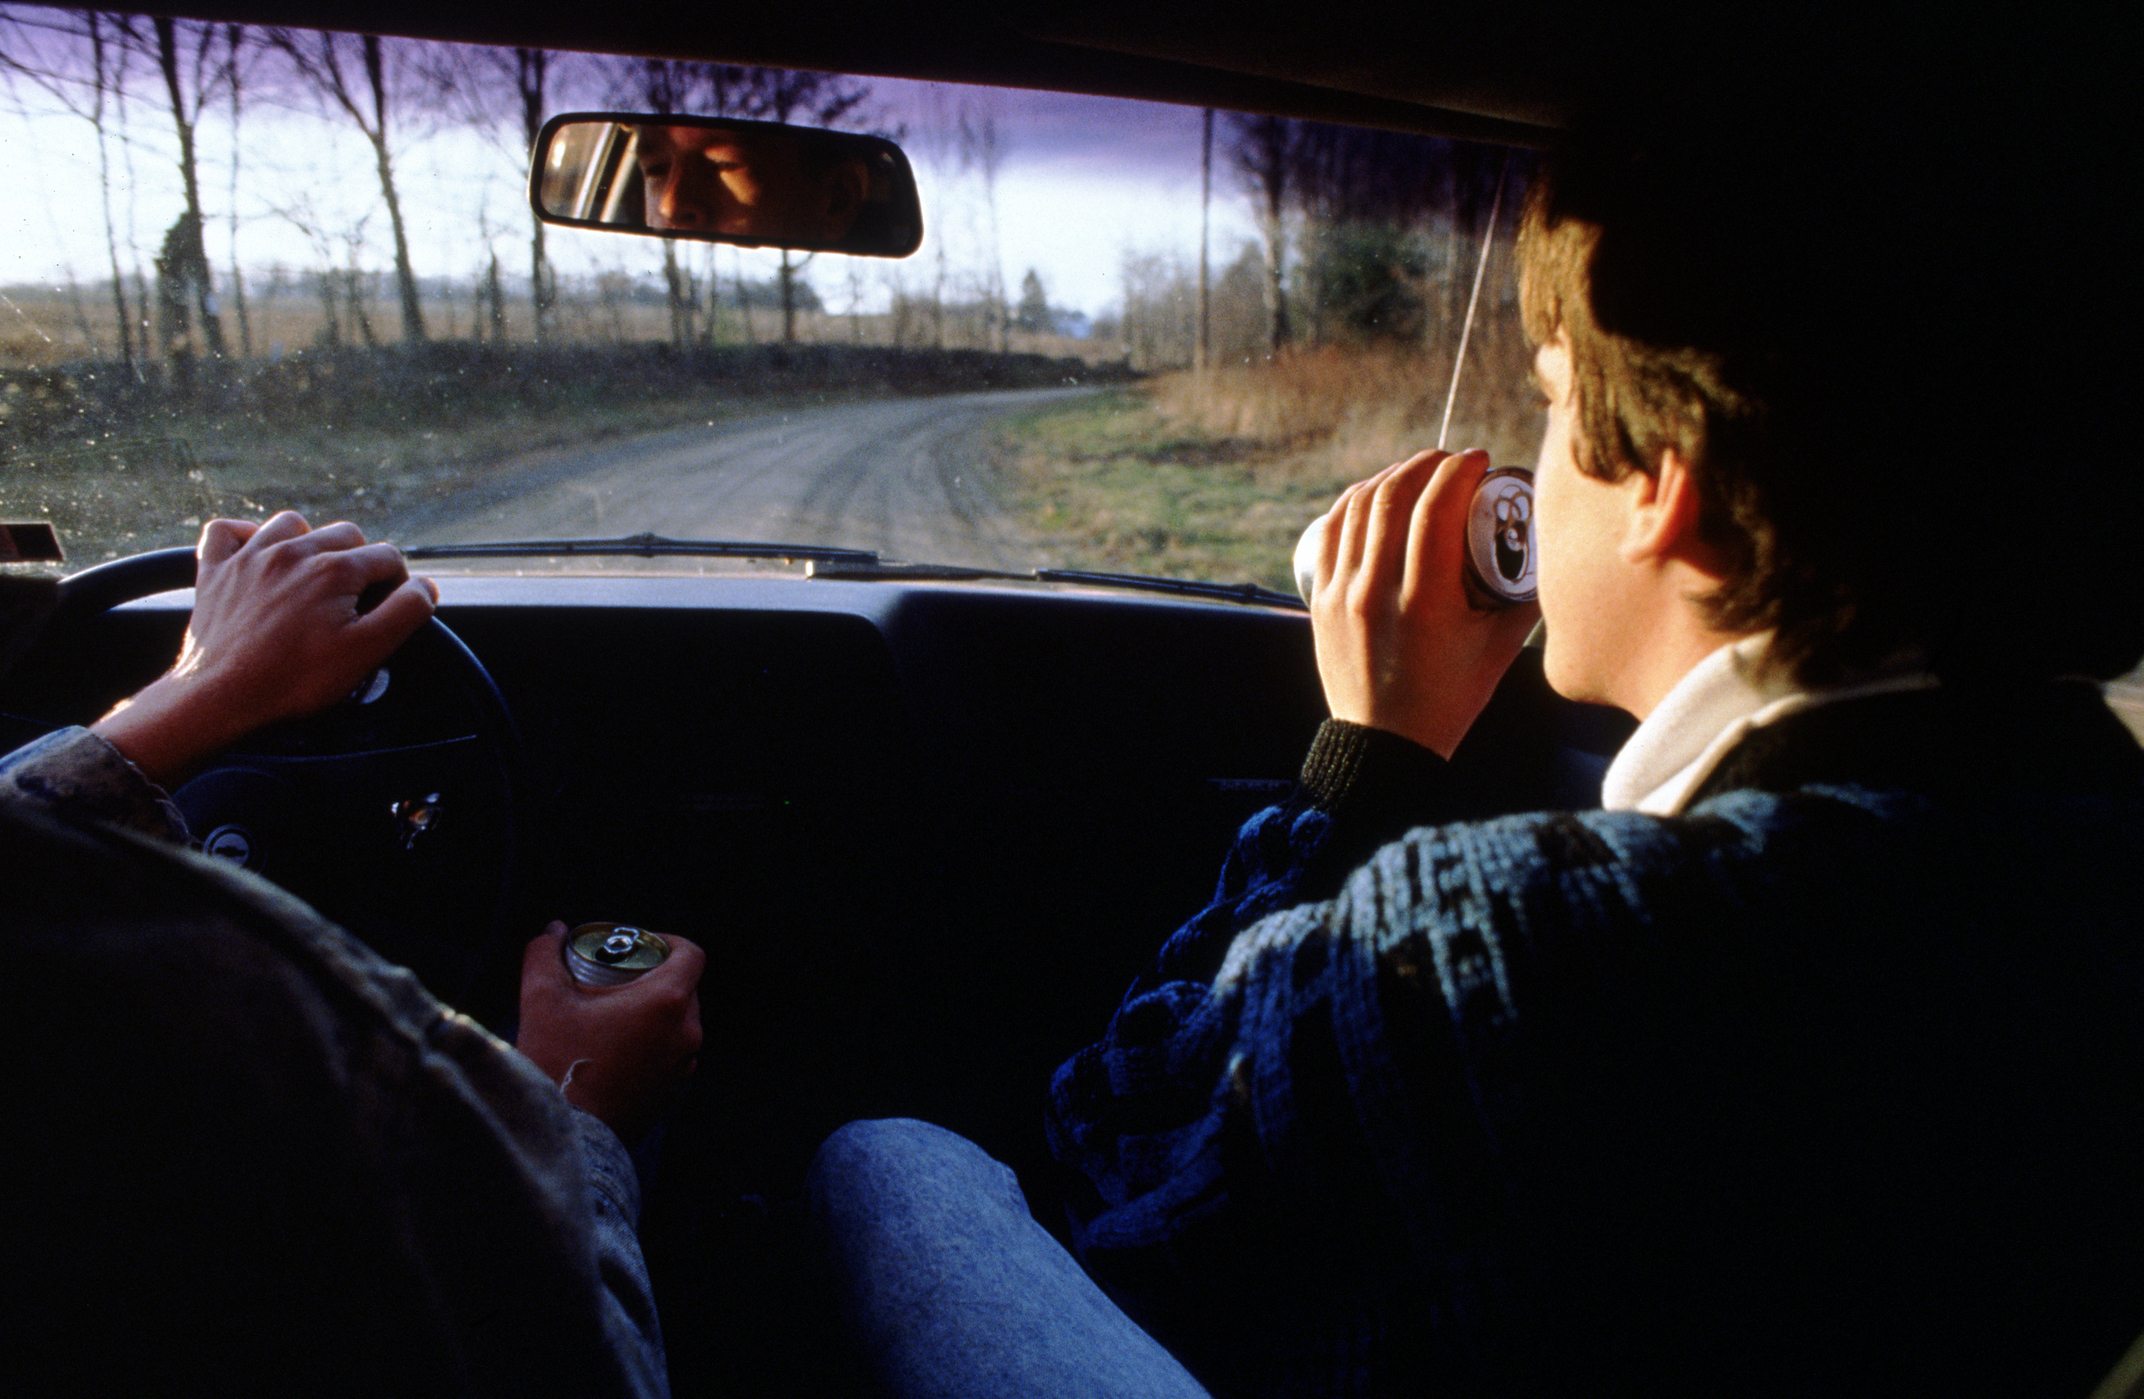 Two teens are drinking while driving